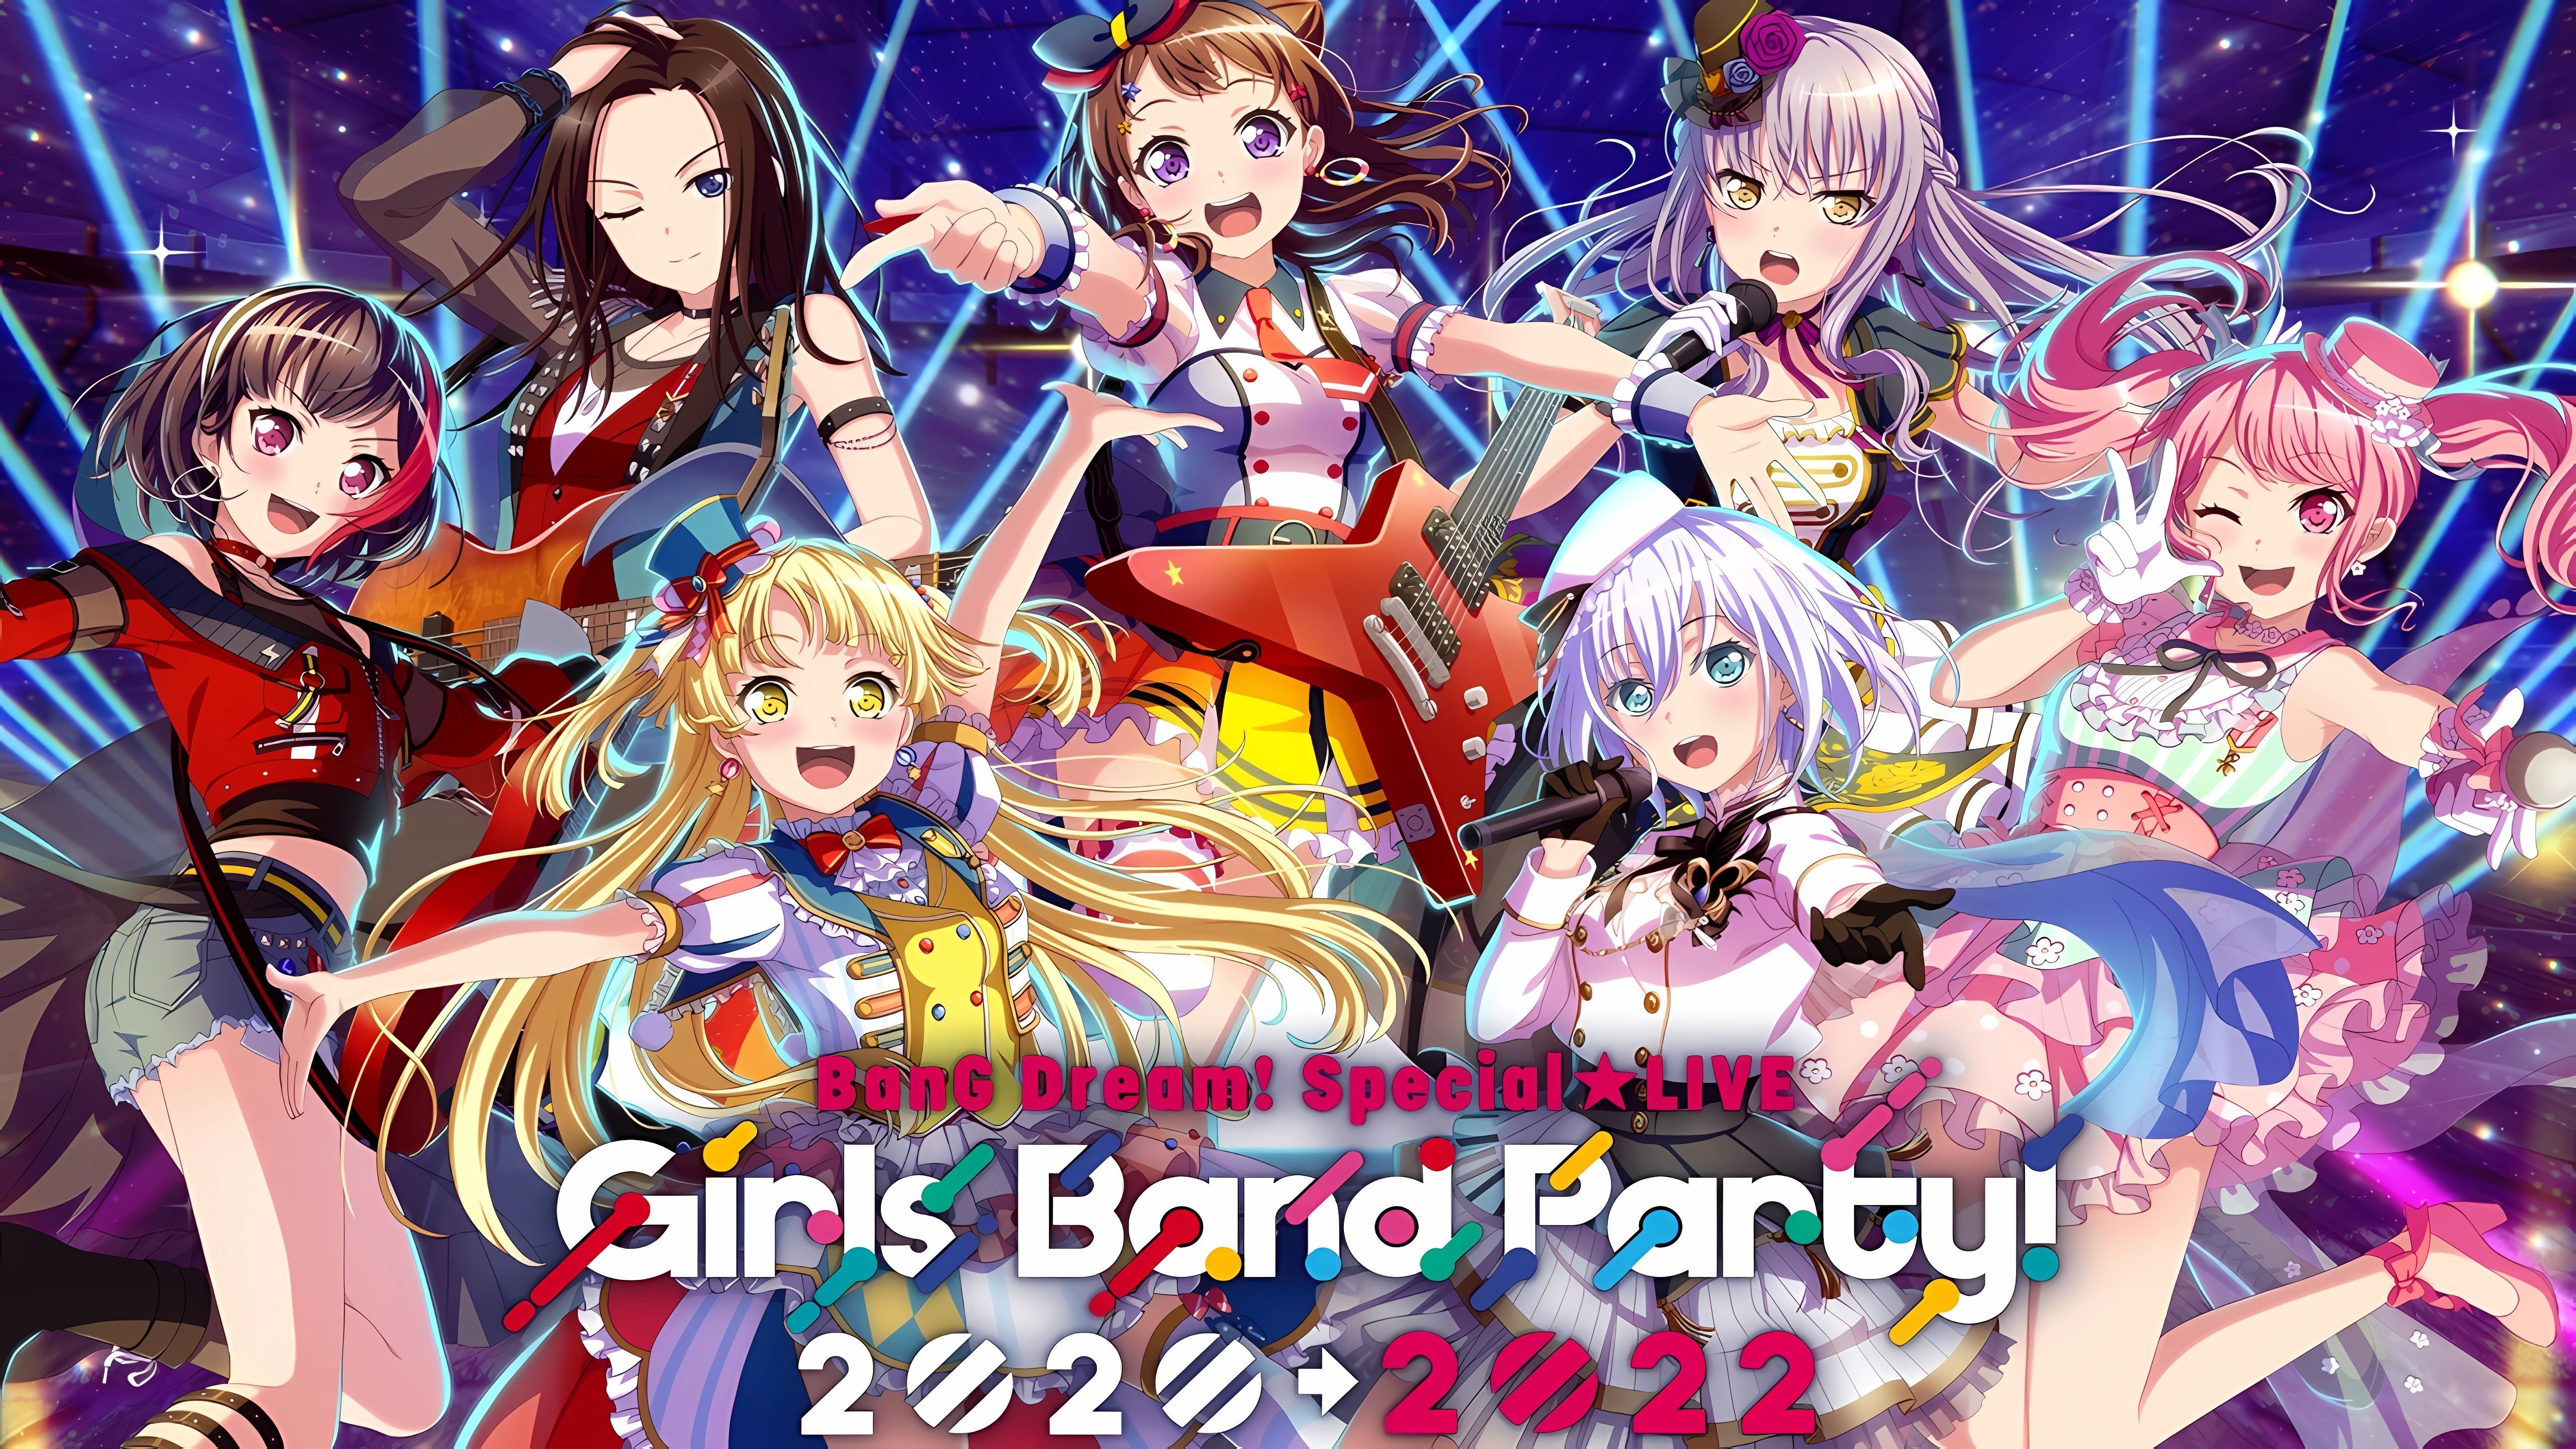 BanG Dream! Special☆LIVE Girls Band Party! 2020→2022